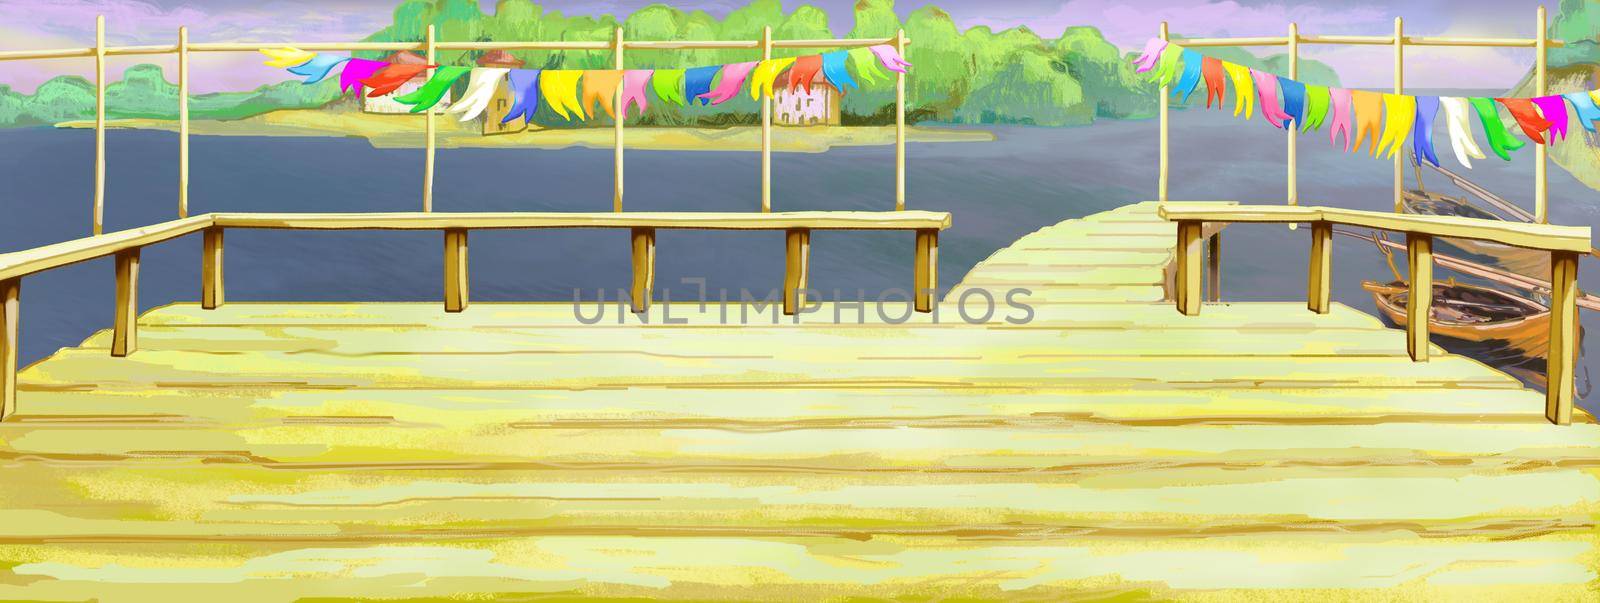 River pier outdoors in retro style by Multipedia